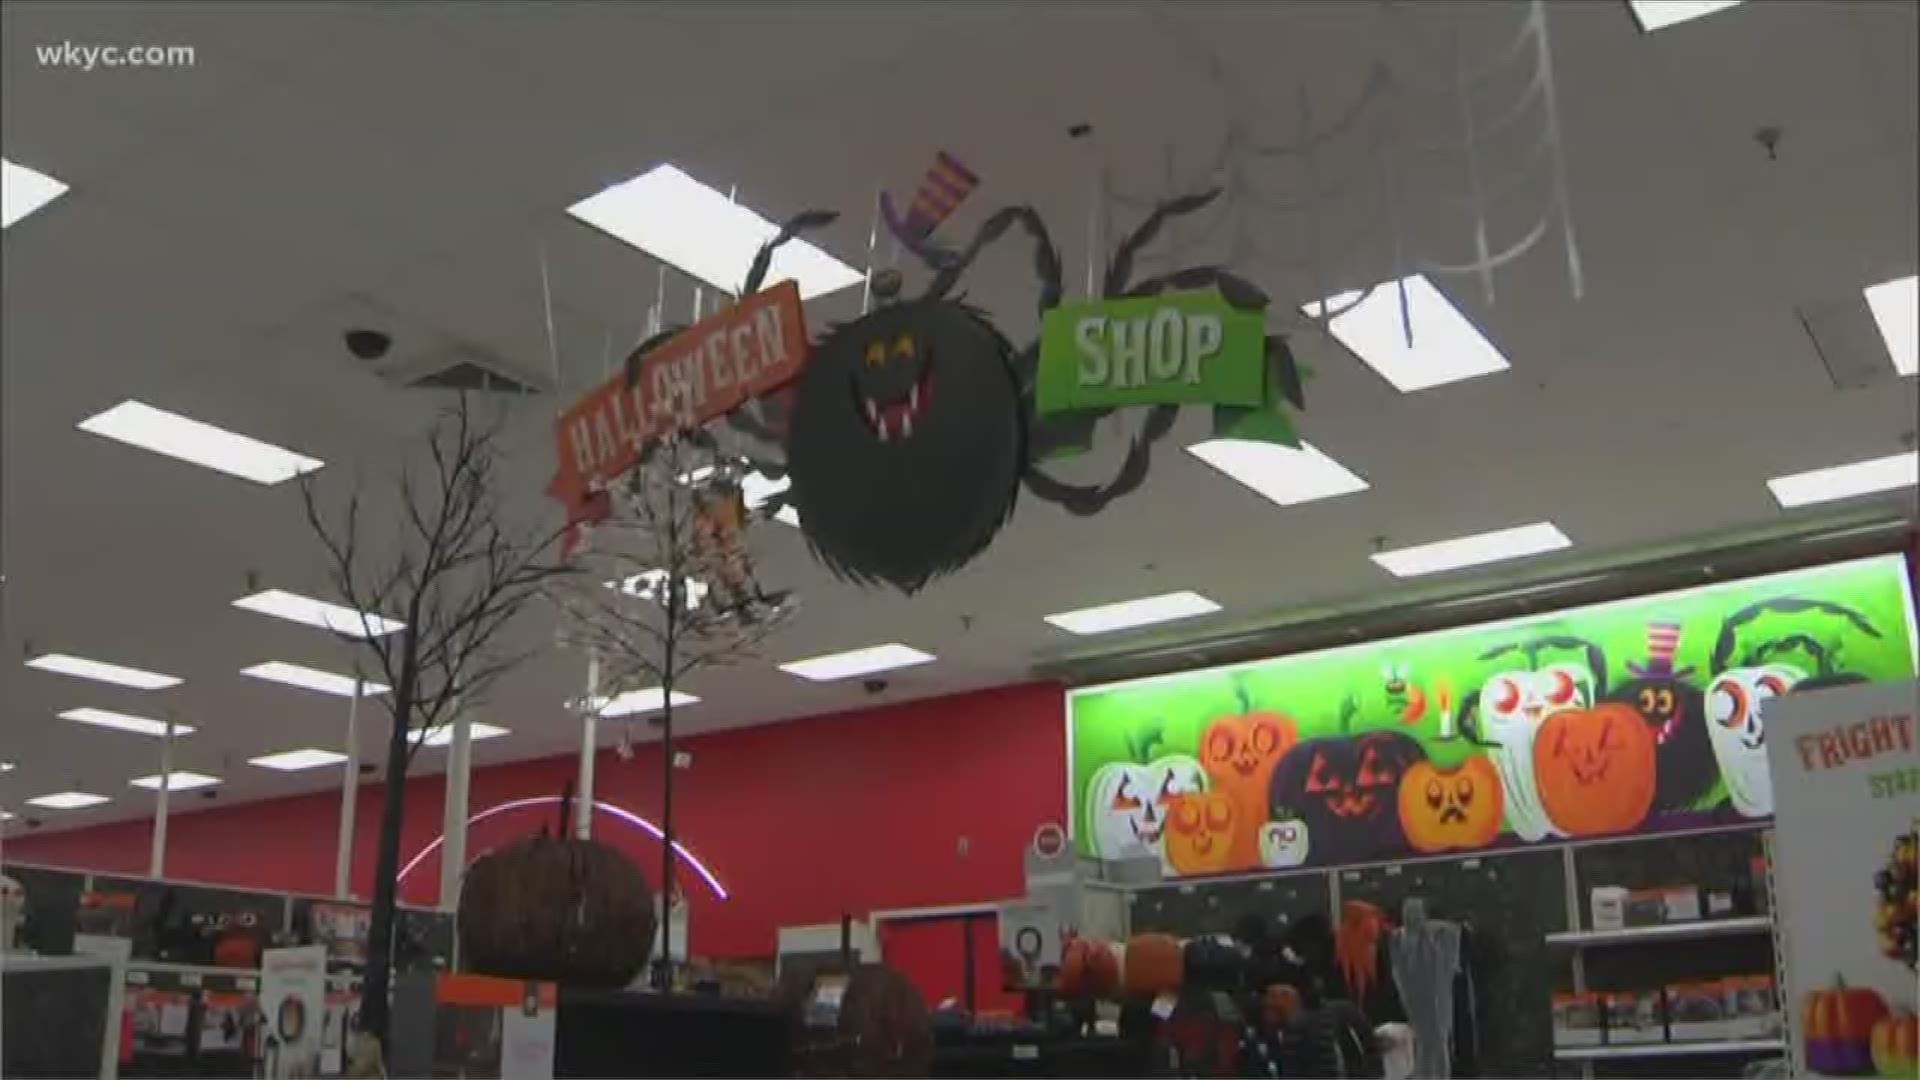 Aug. 7, 2018: Halloween may still be a few months away, but stores are already selling spooky decorations.